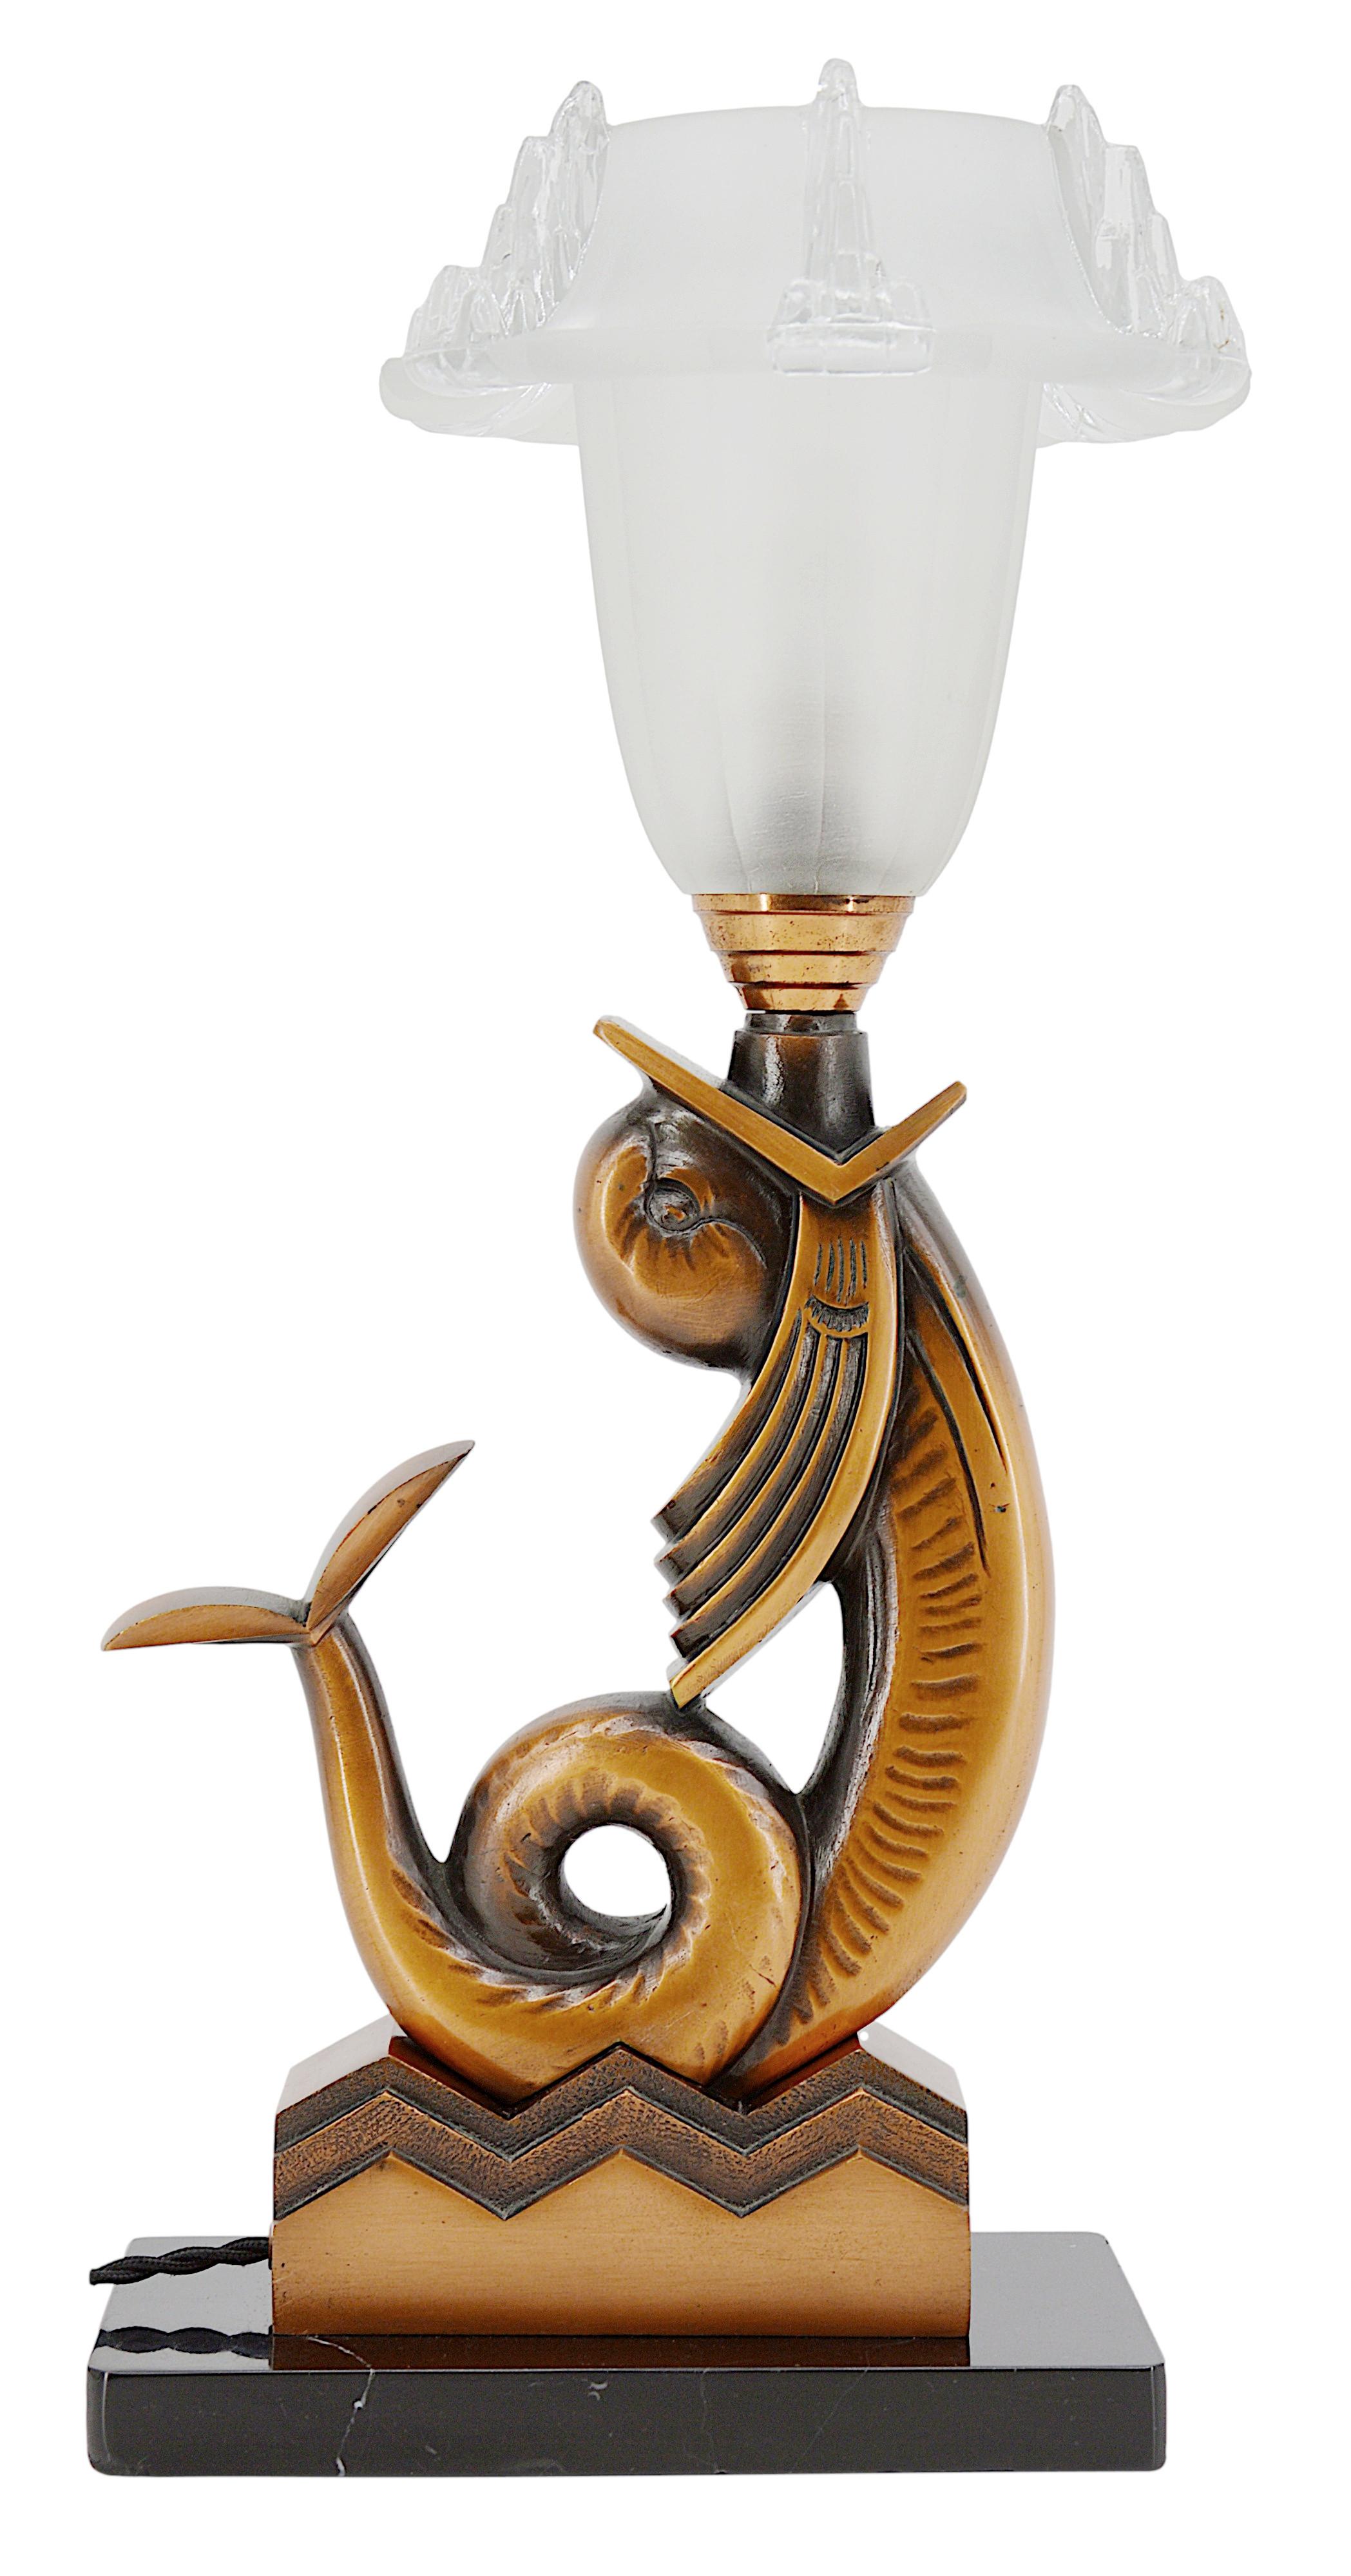 French Art Deco table lamp, France, ca.1930. Spectacular stylized bronze fish supporting a thick glass fountain shade. Lampshade by Jean Gauthier. Marble base. Height : 17.4